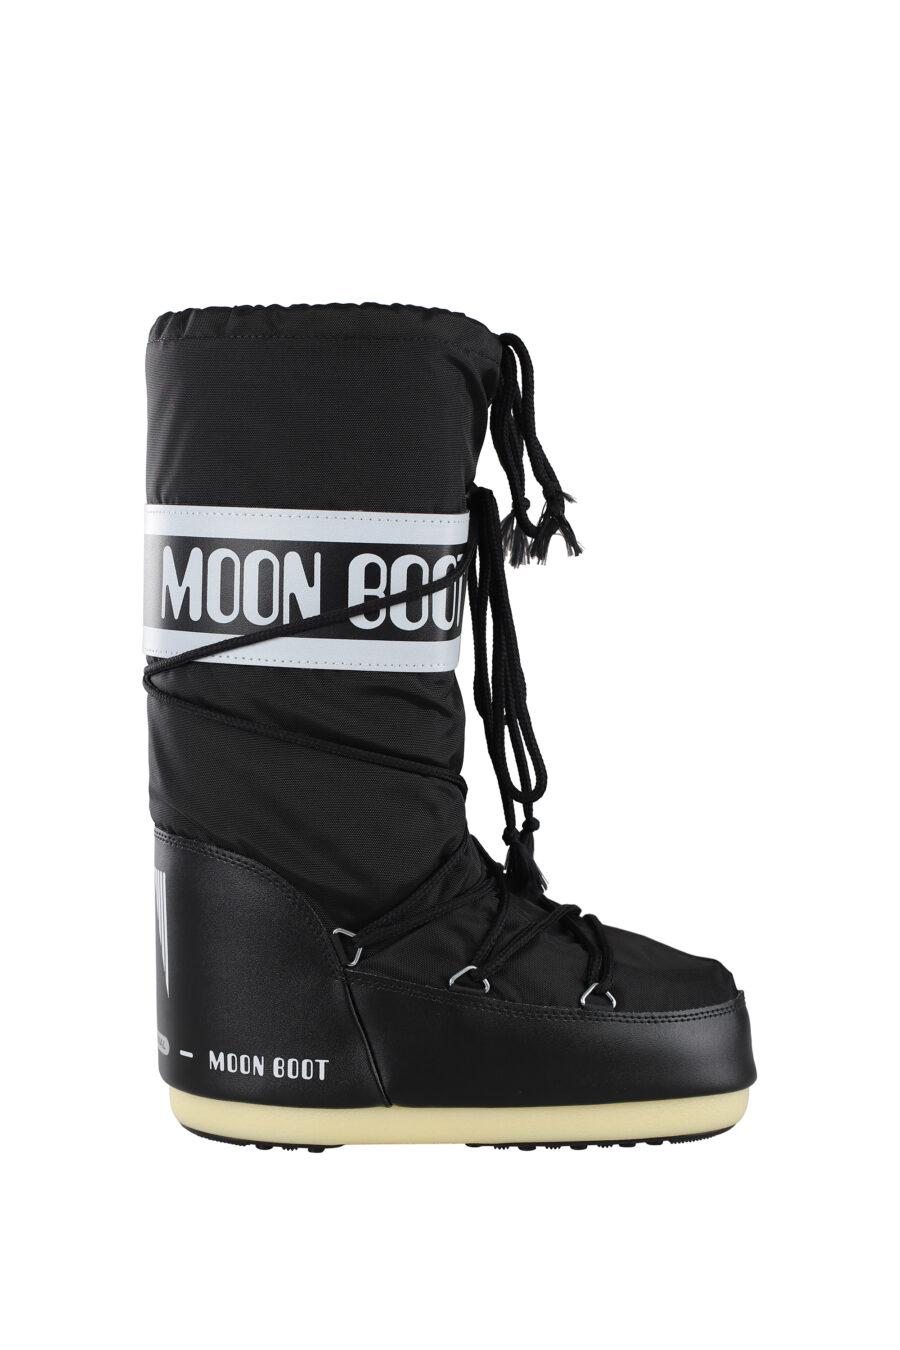 Black snow boots with white logo on ribbon - IMG 6796